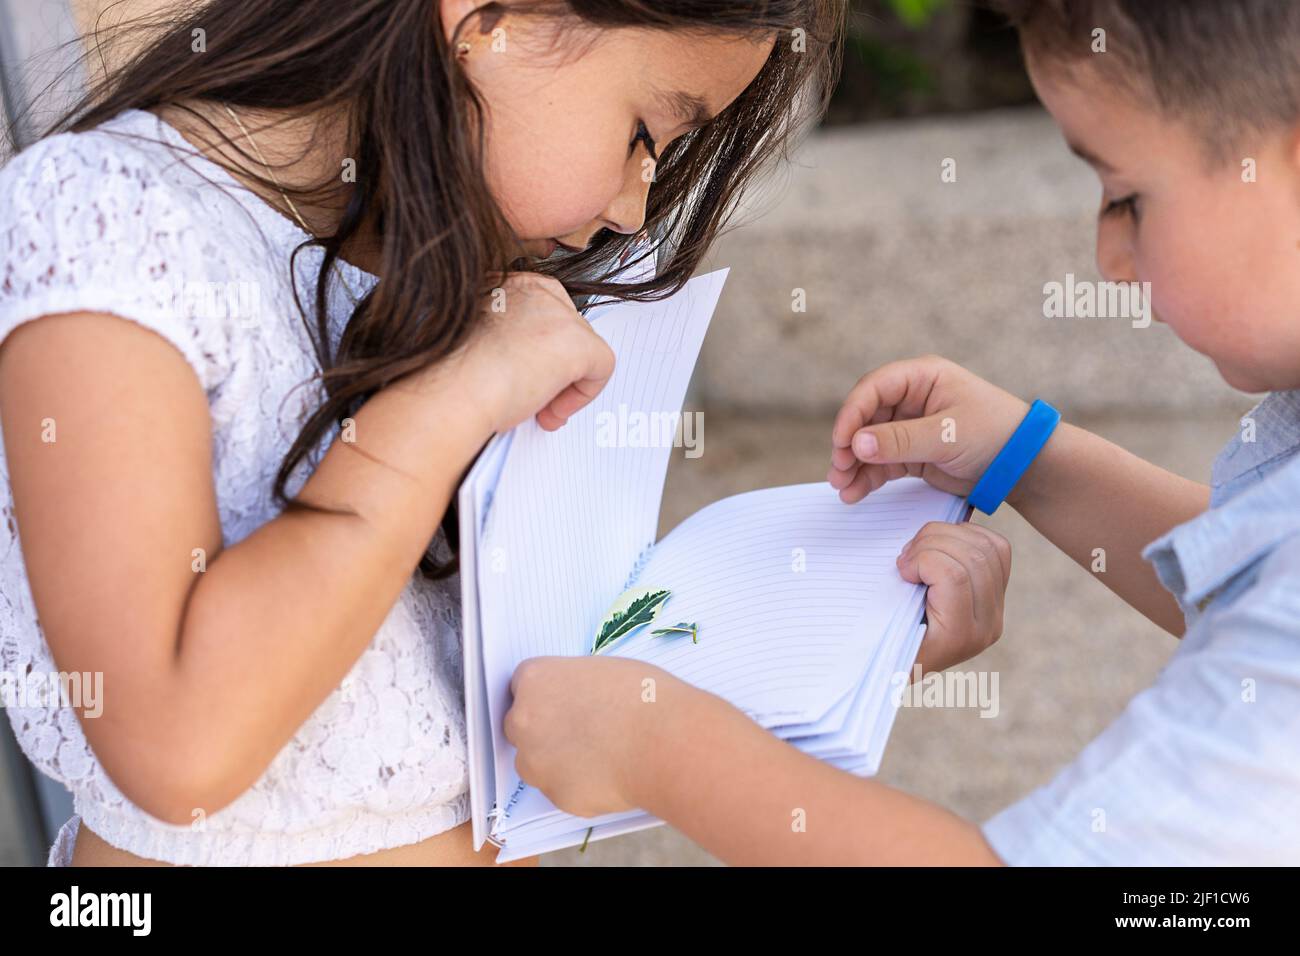 Children arrange flowers onto the pages of a notebook for making pressed flowers. Stock Photo